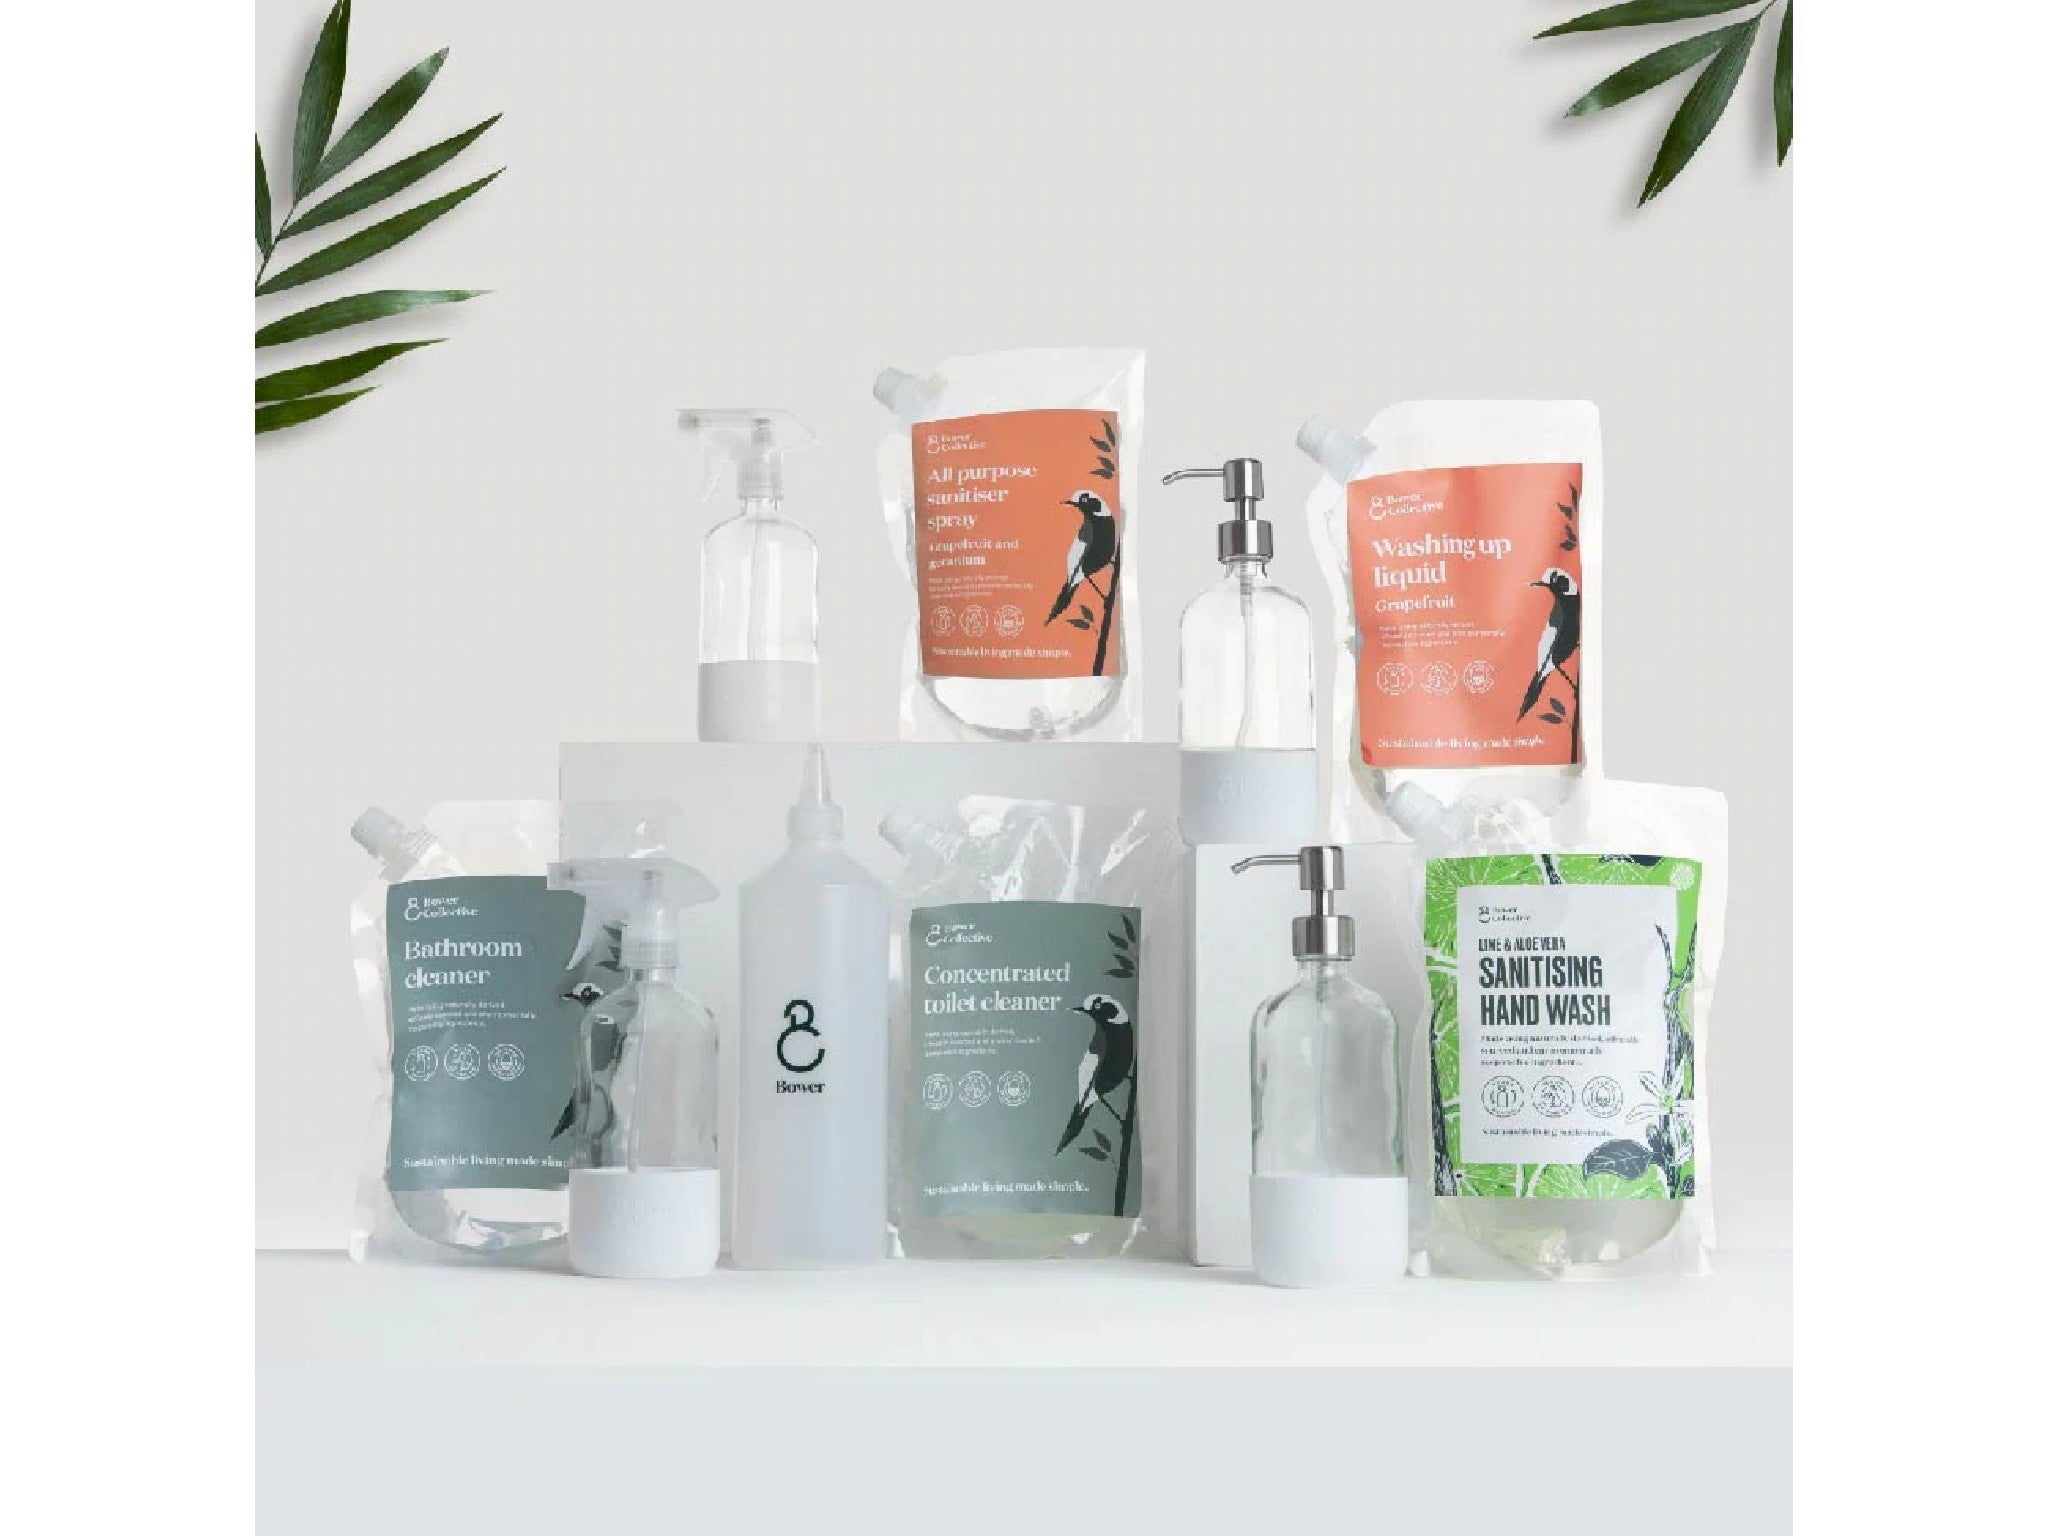  Bower Collective ??bower sparkling clean home bundle indybes